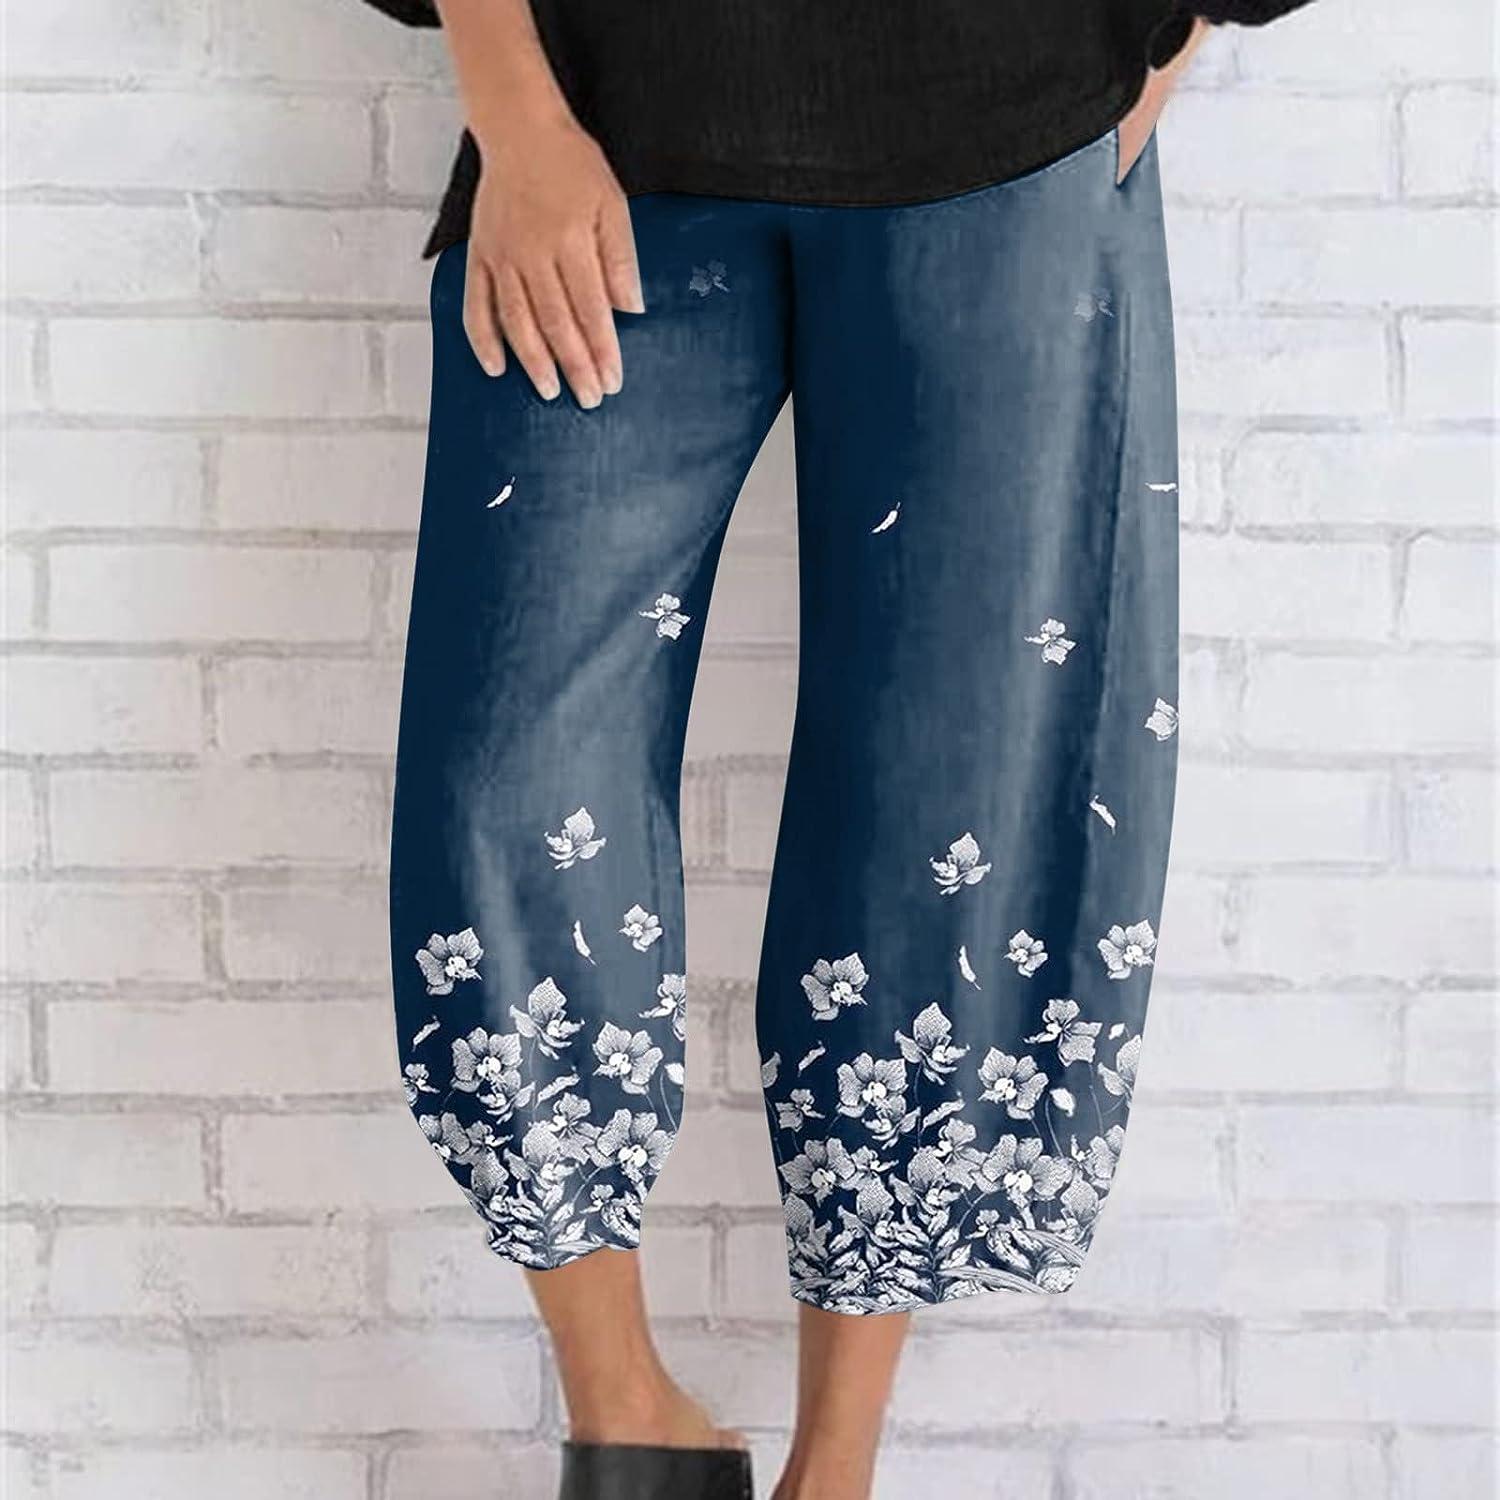 Womens Palazzo Pants Casual,Women's Casual Summer Capri Pants Cotton Linen  Print Wide Leg Ankle Pants with Pockets T01-navy X-Large